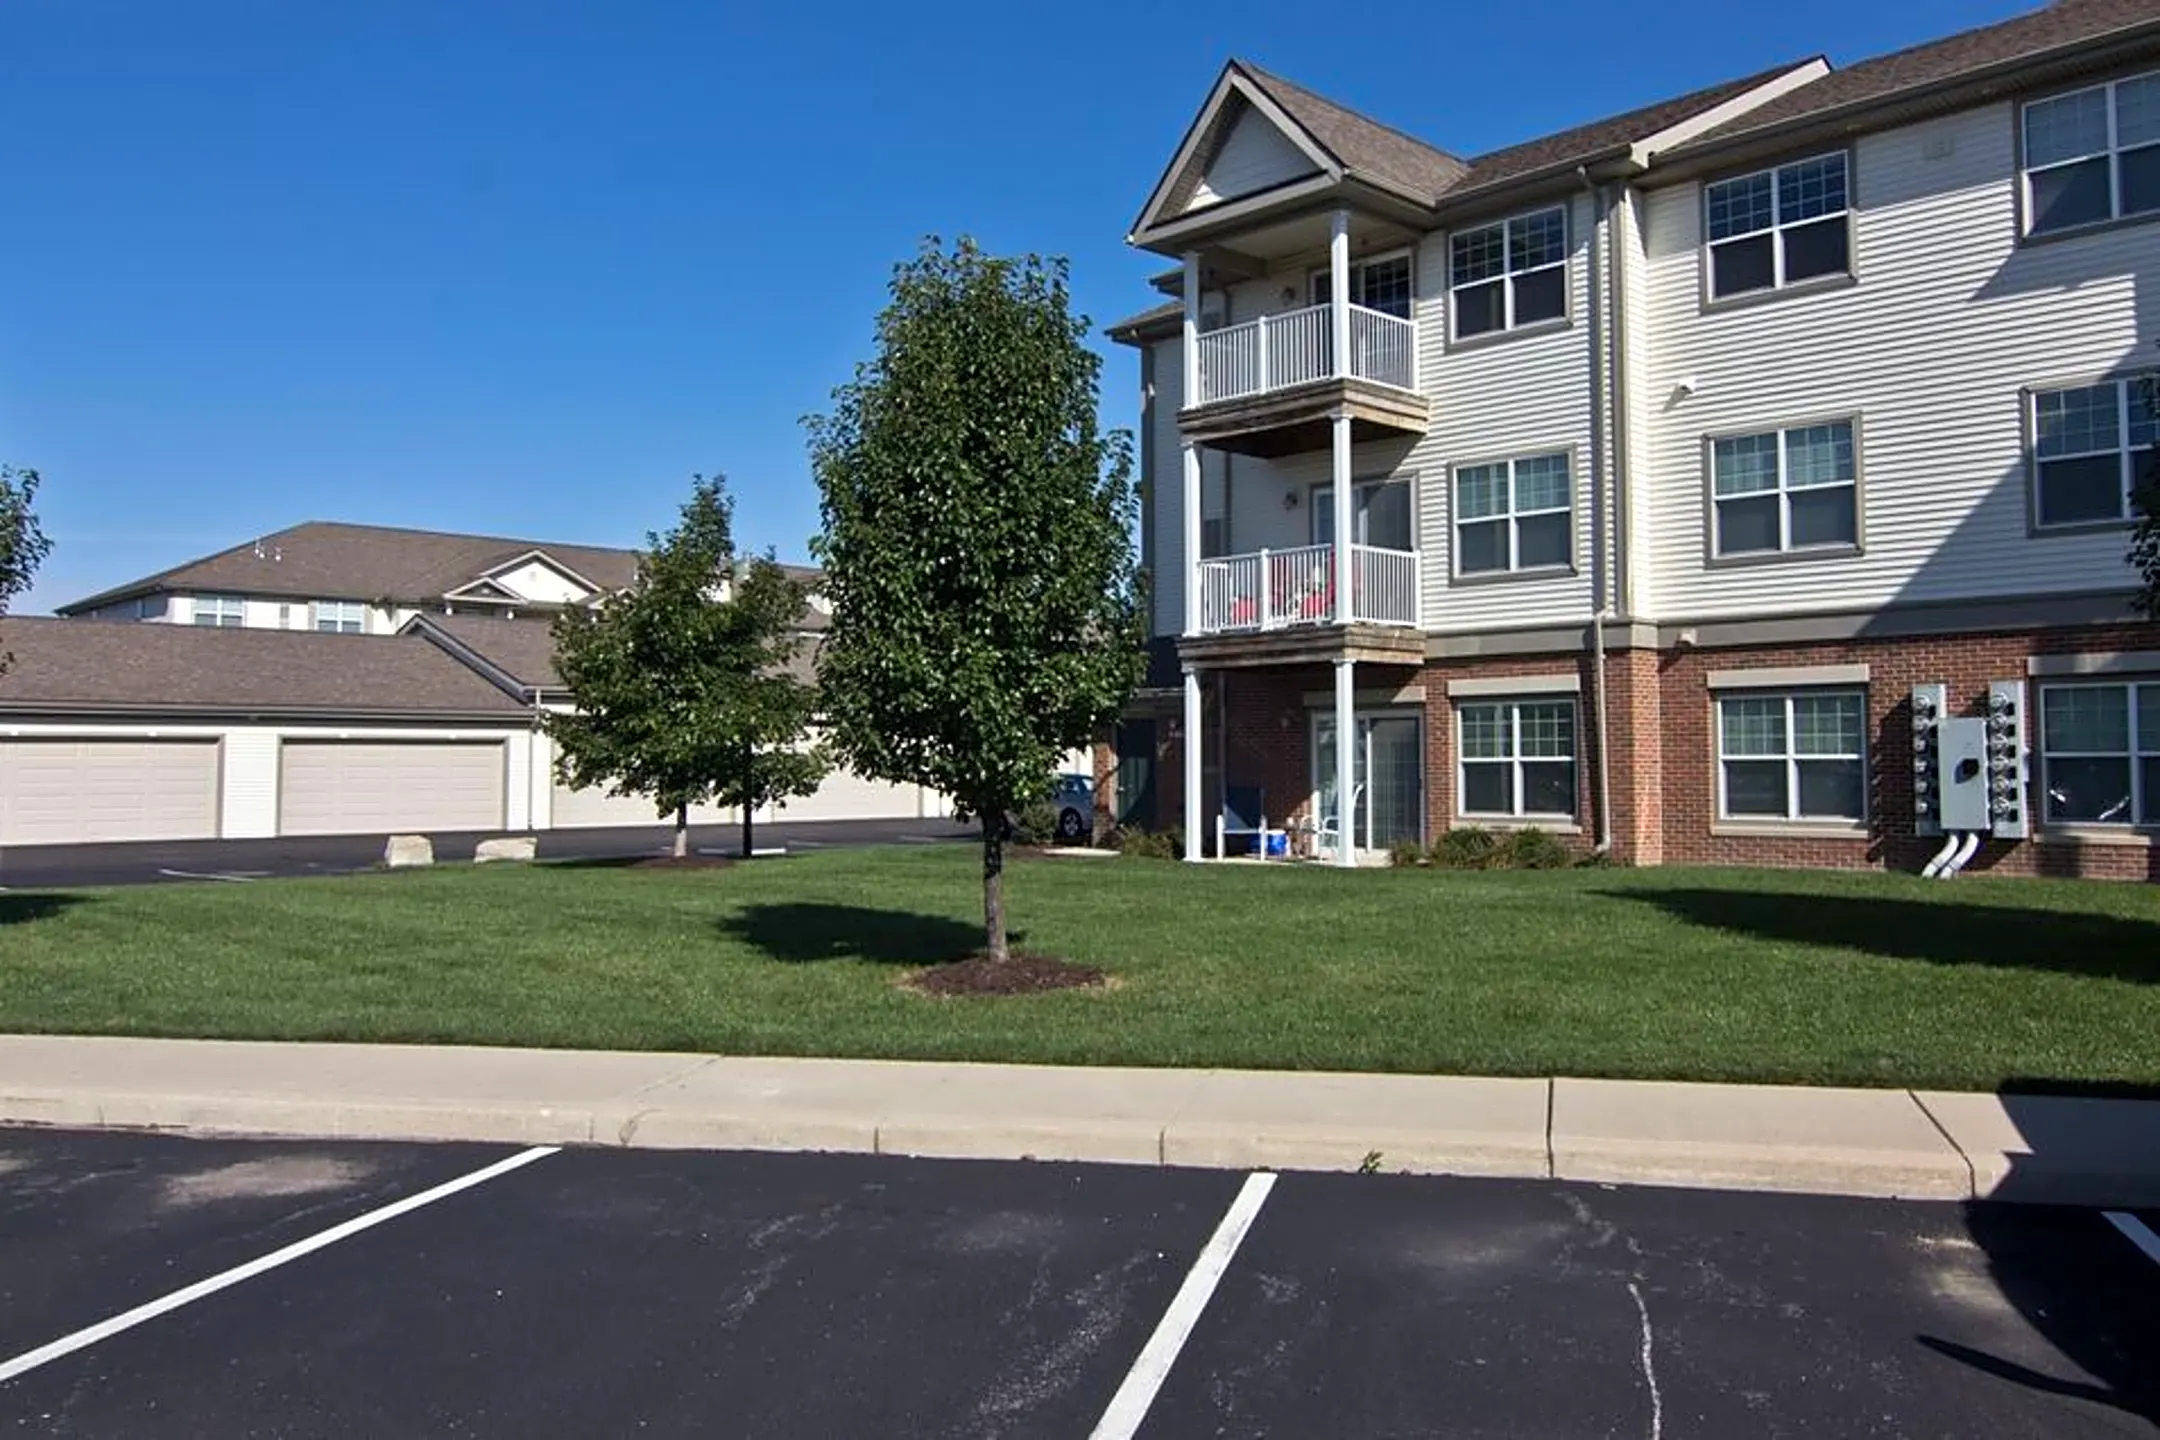 Building - The Residences at Carronade - Perrysburg, OH